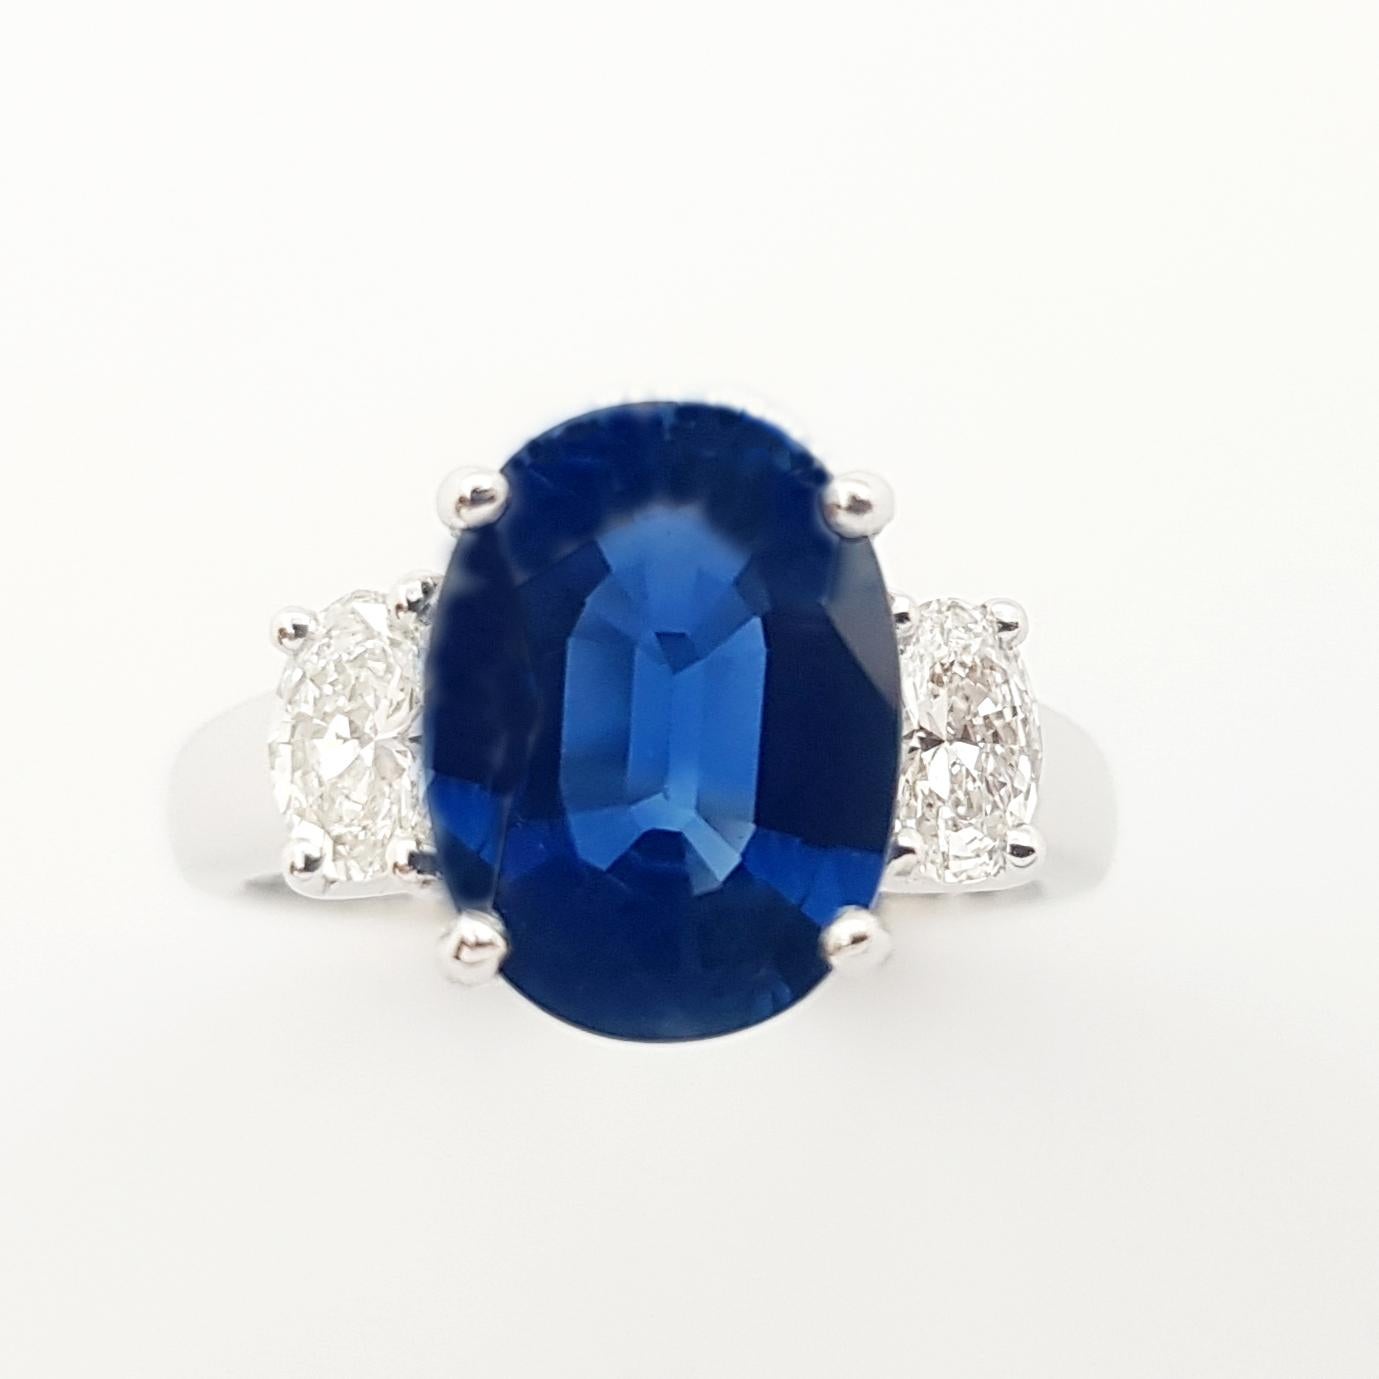 GIA Certified 3.89 cts Blue Sapphire with Diamond Ring set in Platinum 950  For Sale 2